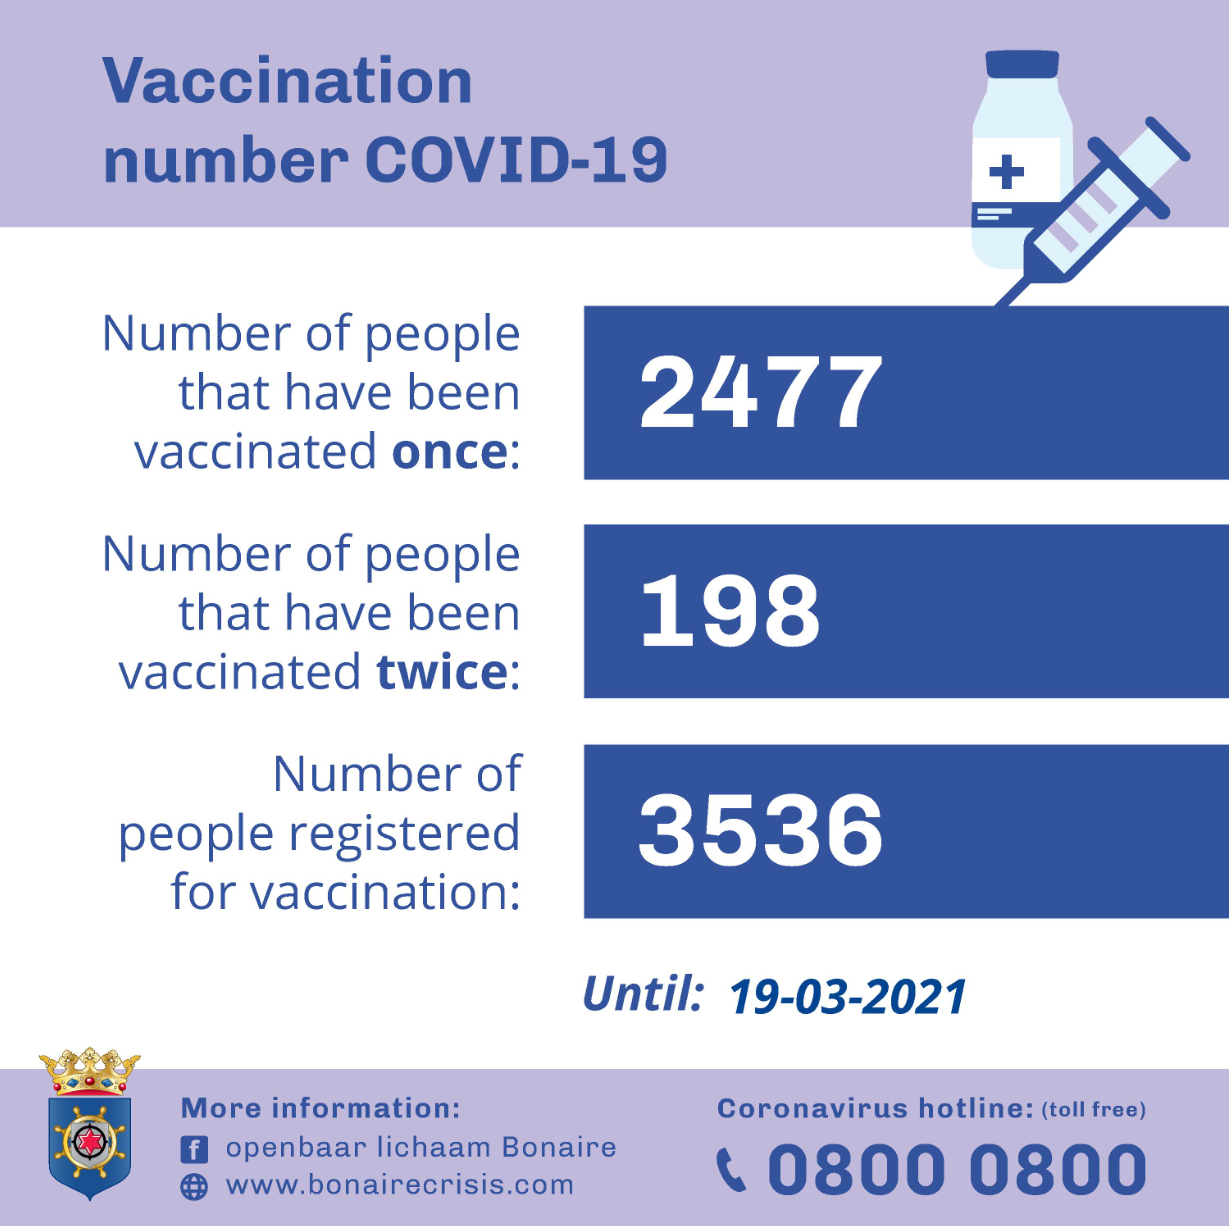 Vaccination Campaign Bonaire still not picking up Much Speed